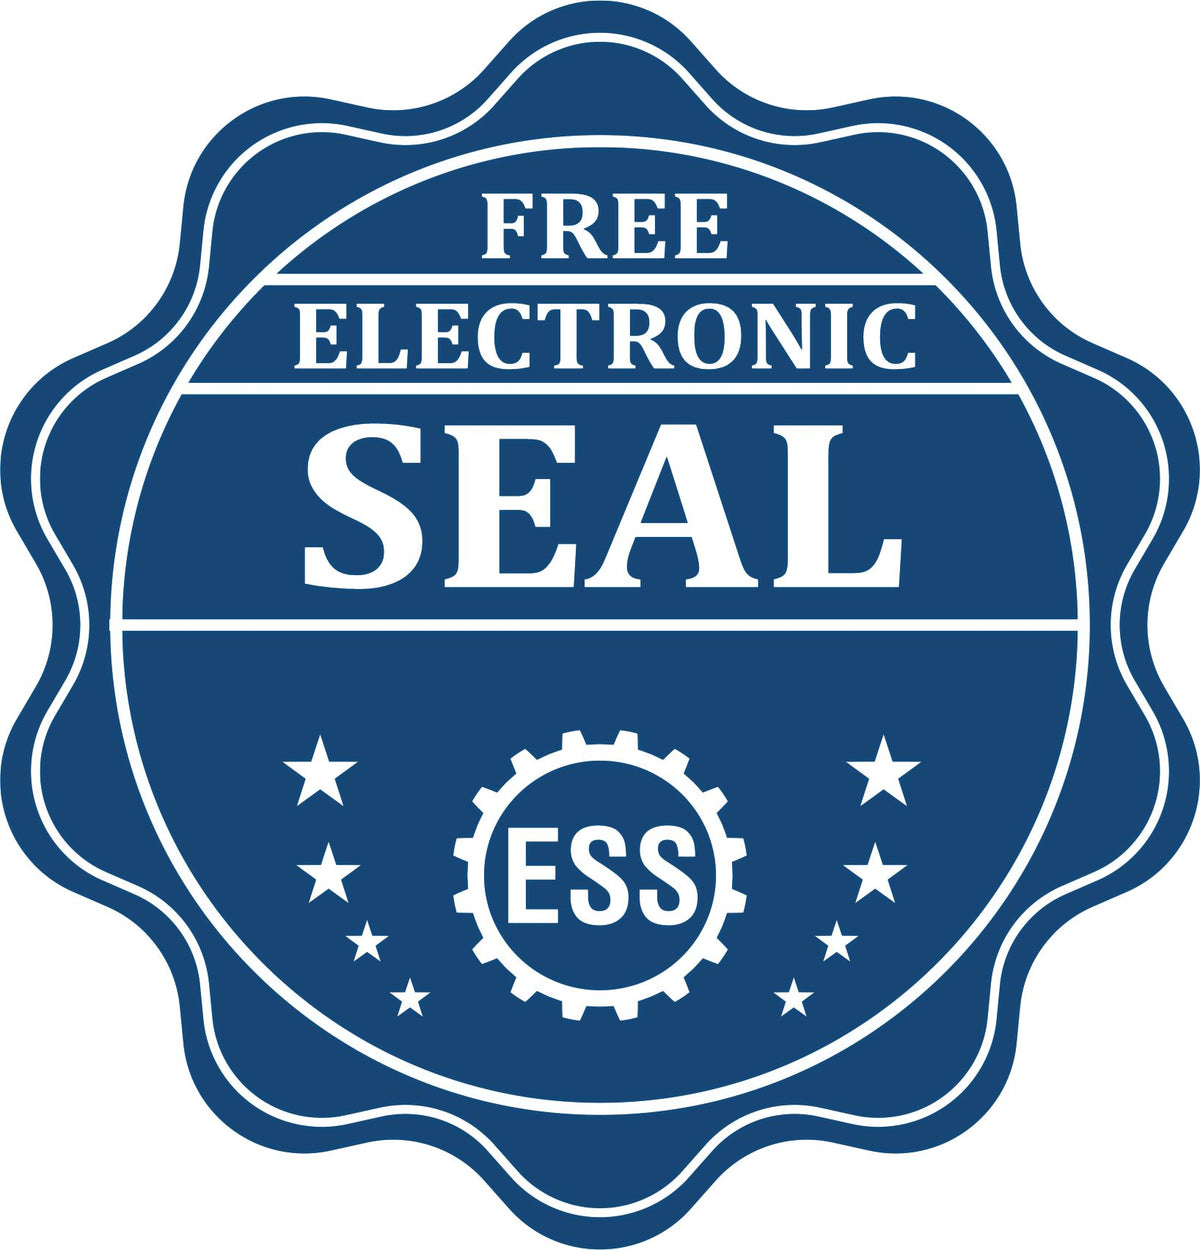 A badge showing a free electronic seal for the Nebraska Desk Surveyor Seal Embosser with stars and the ESS gear on the emblem.